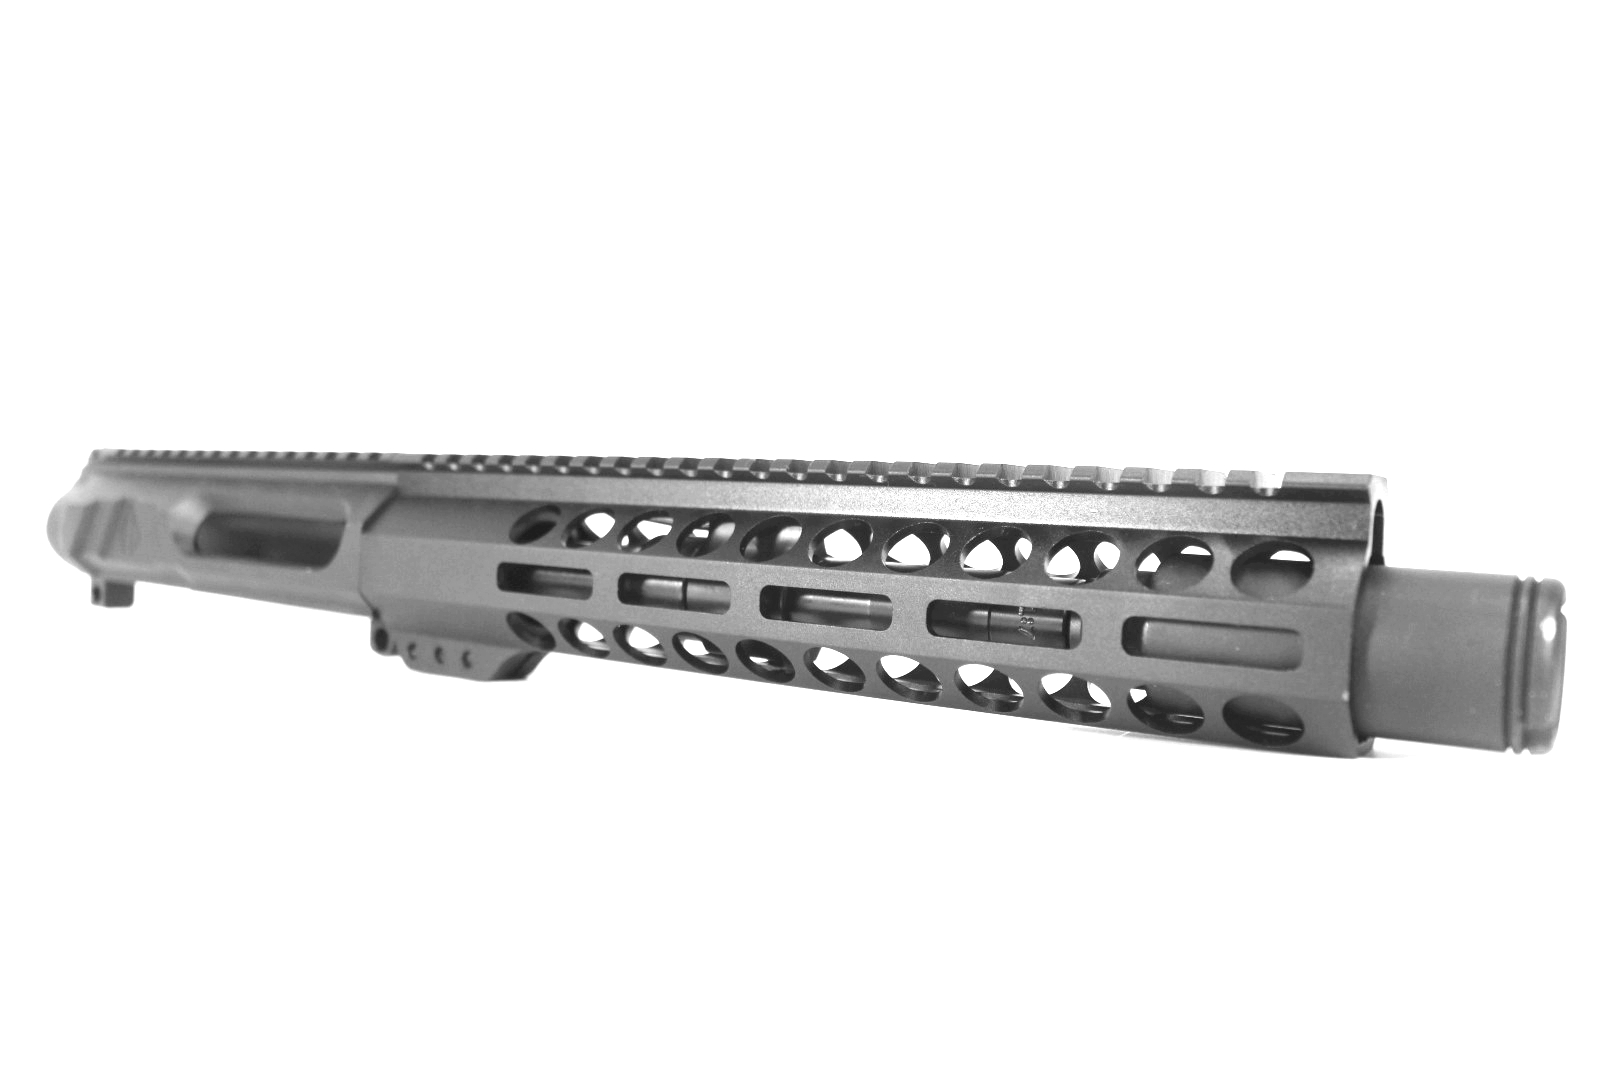 8.5 inch AR-15 Non Reciprocating Side Charging 300 Blackout Pistol Melonite Upper w/CAN